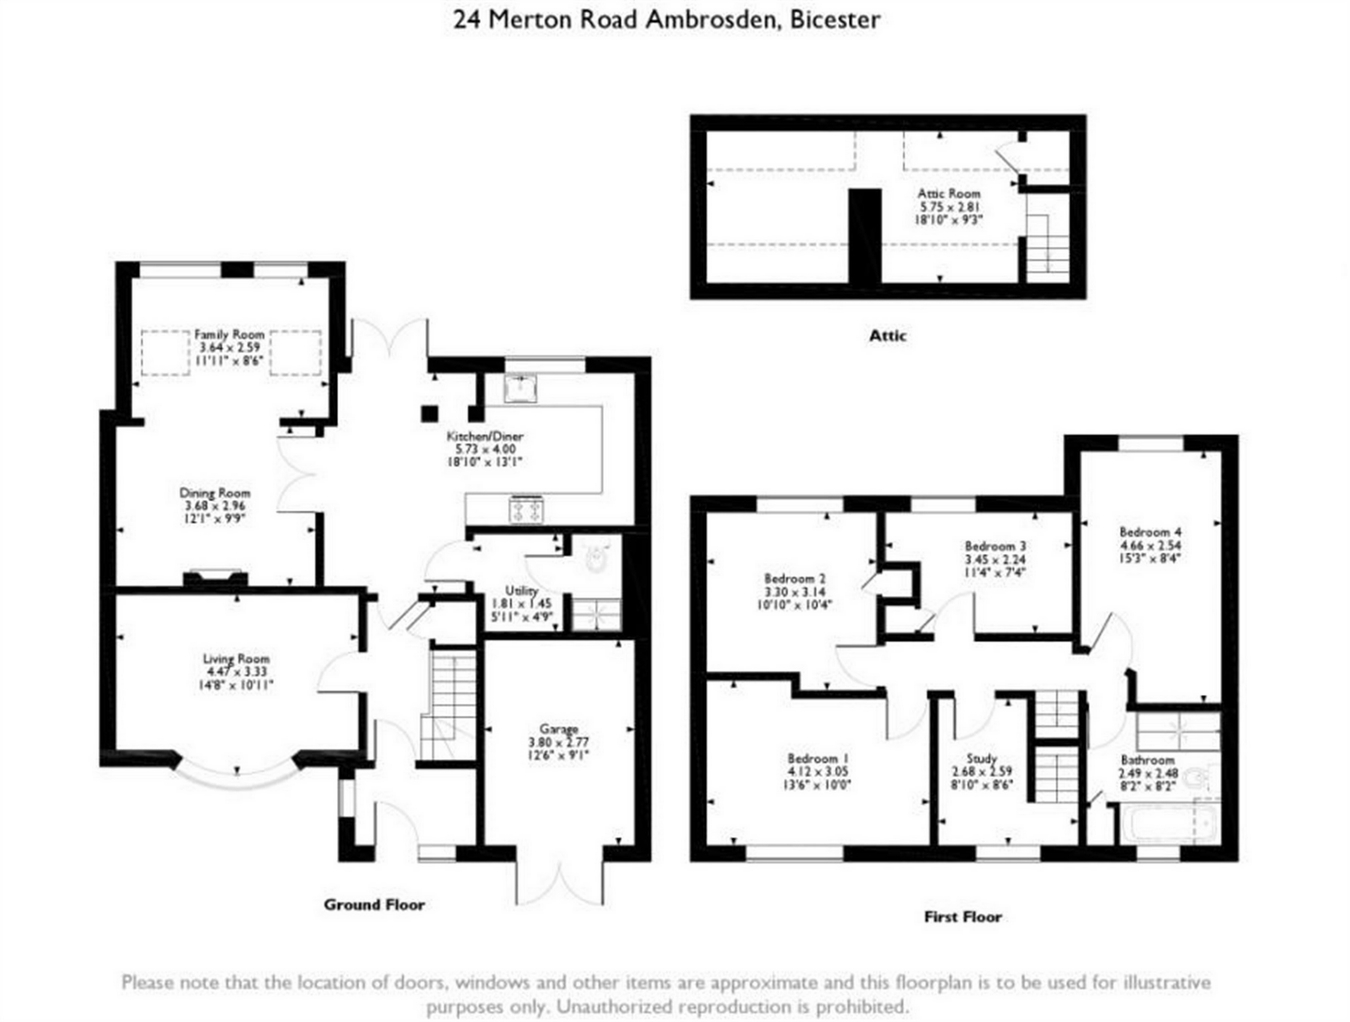 5 Bedrooms Semi-detached house for sale in Merton Road, Ambrosden, Bicester, Oxfordshire OX25